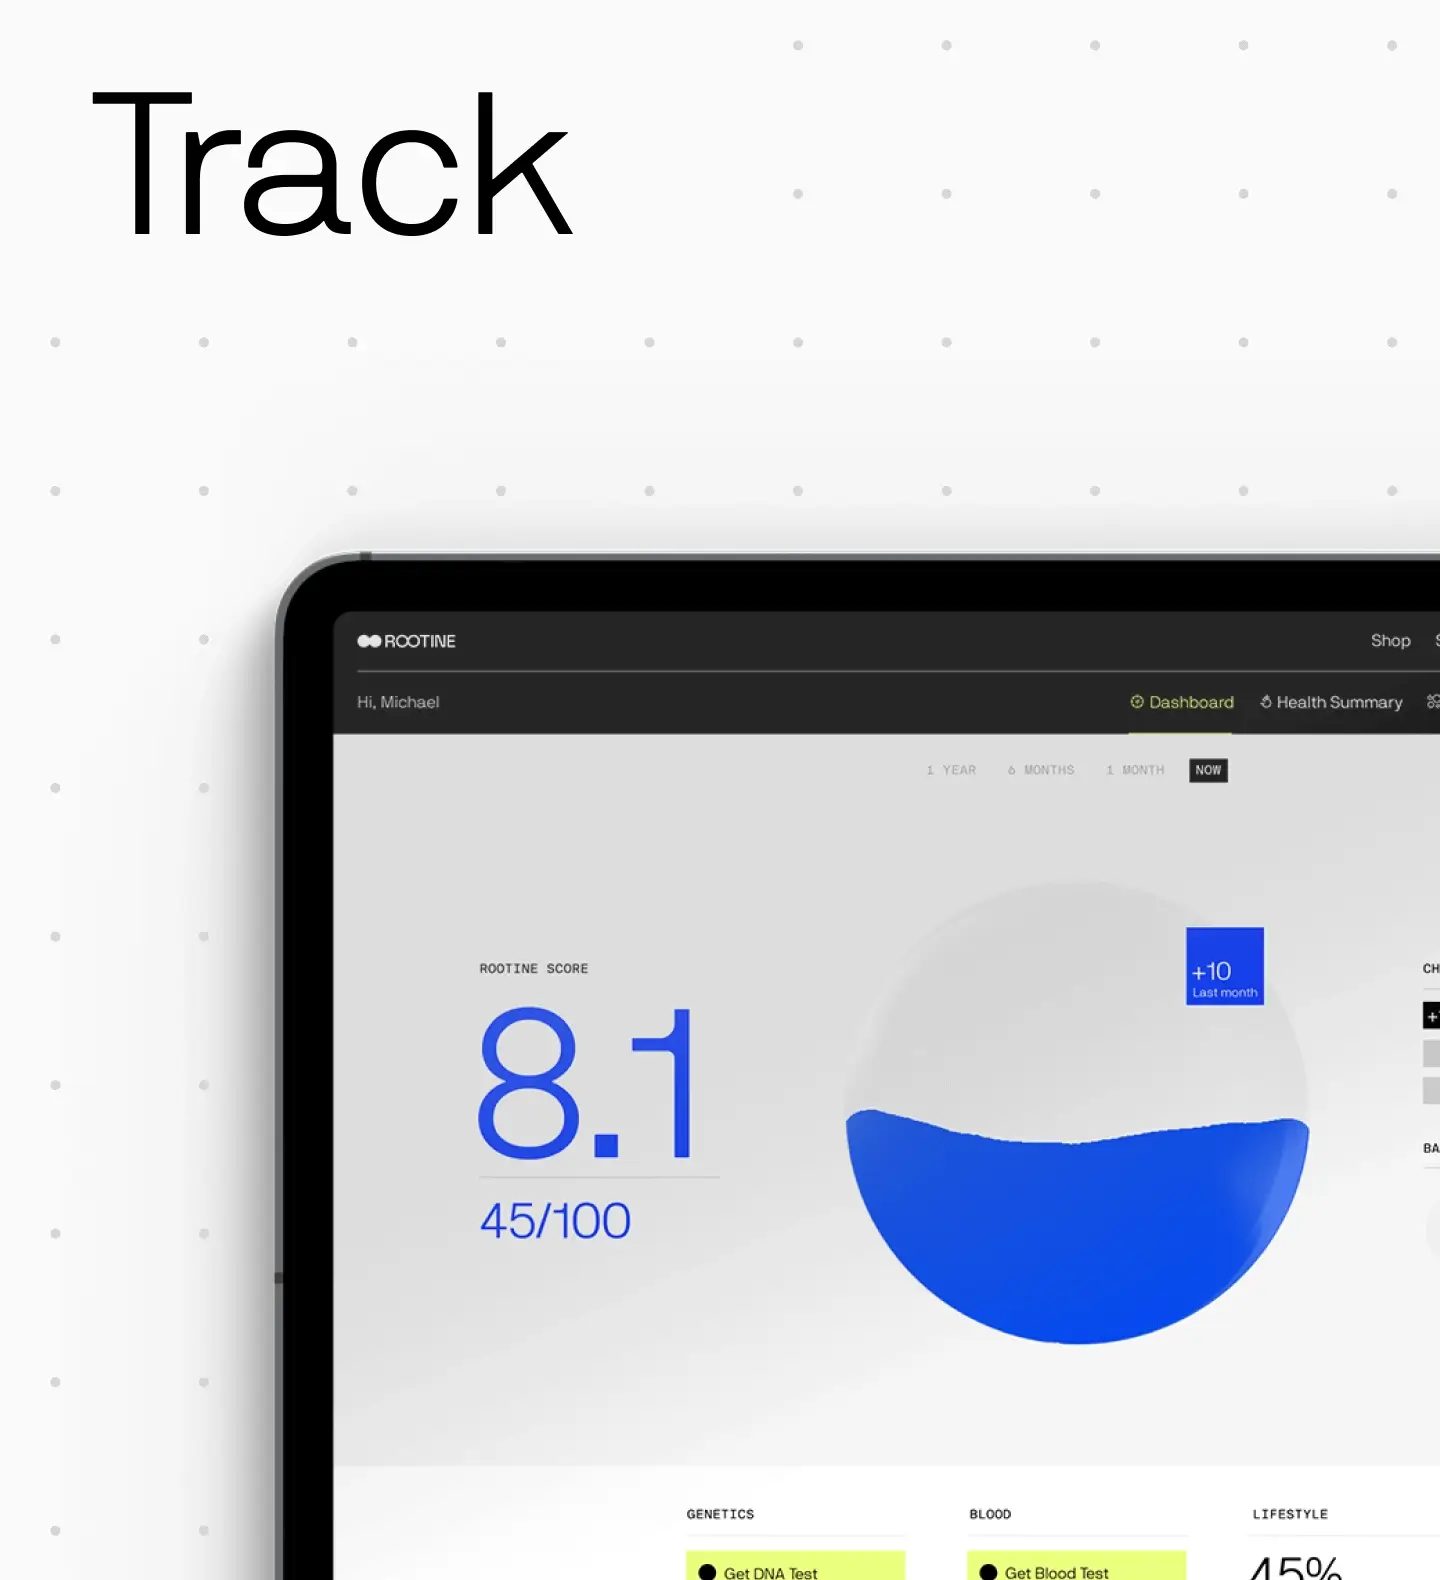 Data visualization in tracking app